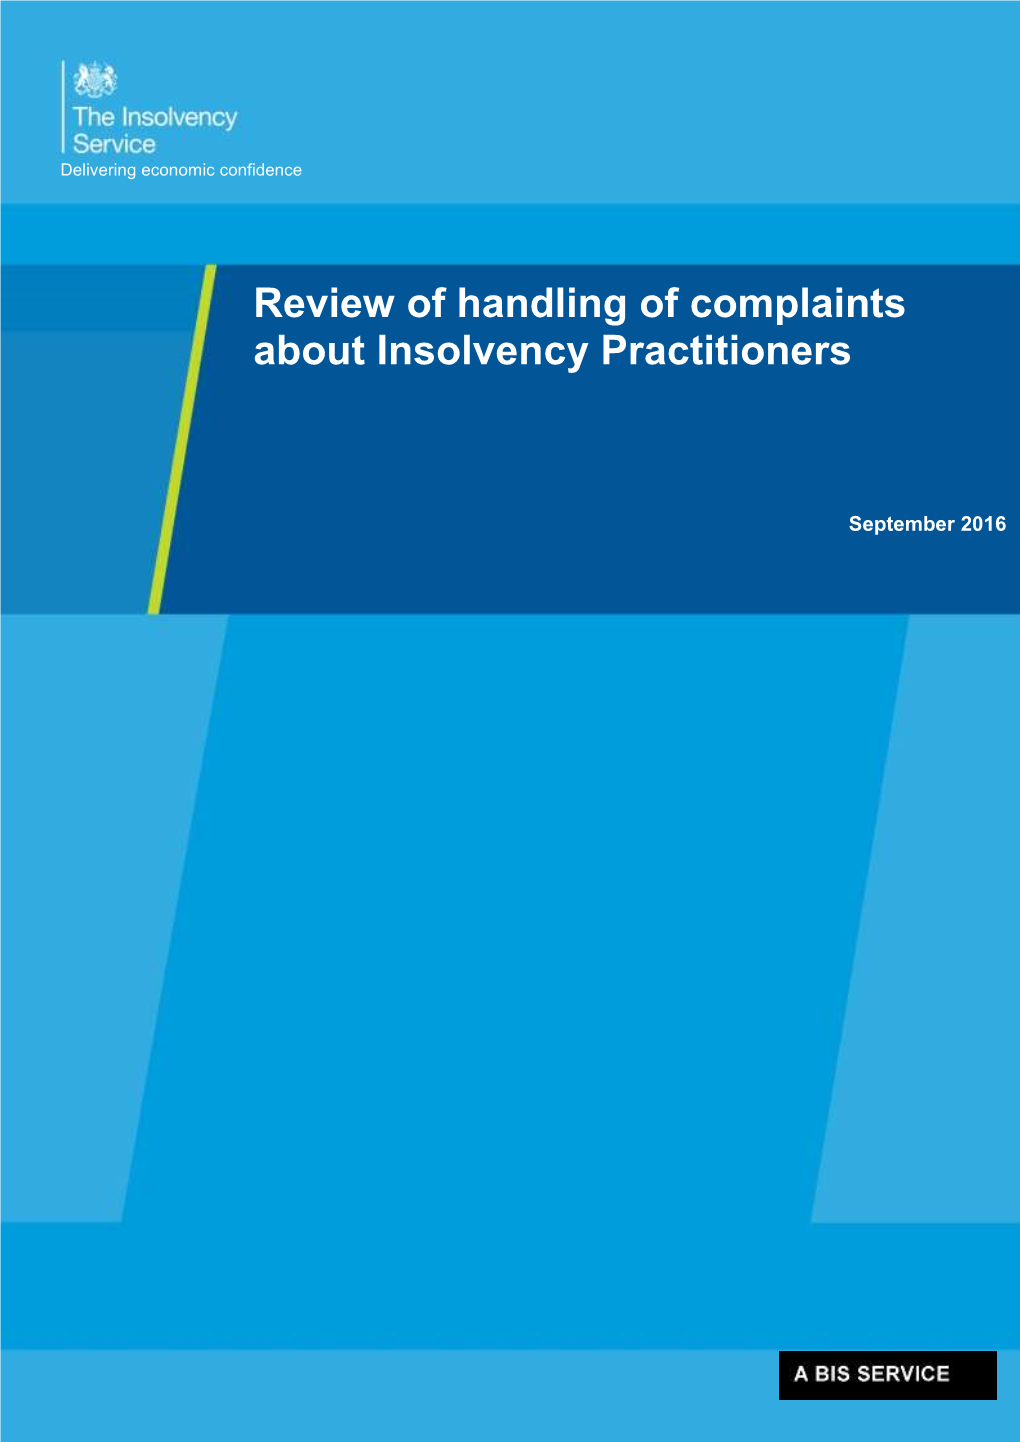 Review of Handling of Complaints About Insolvency Practitioners